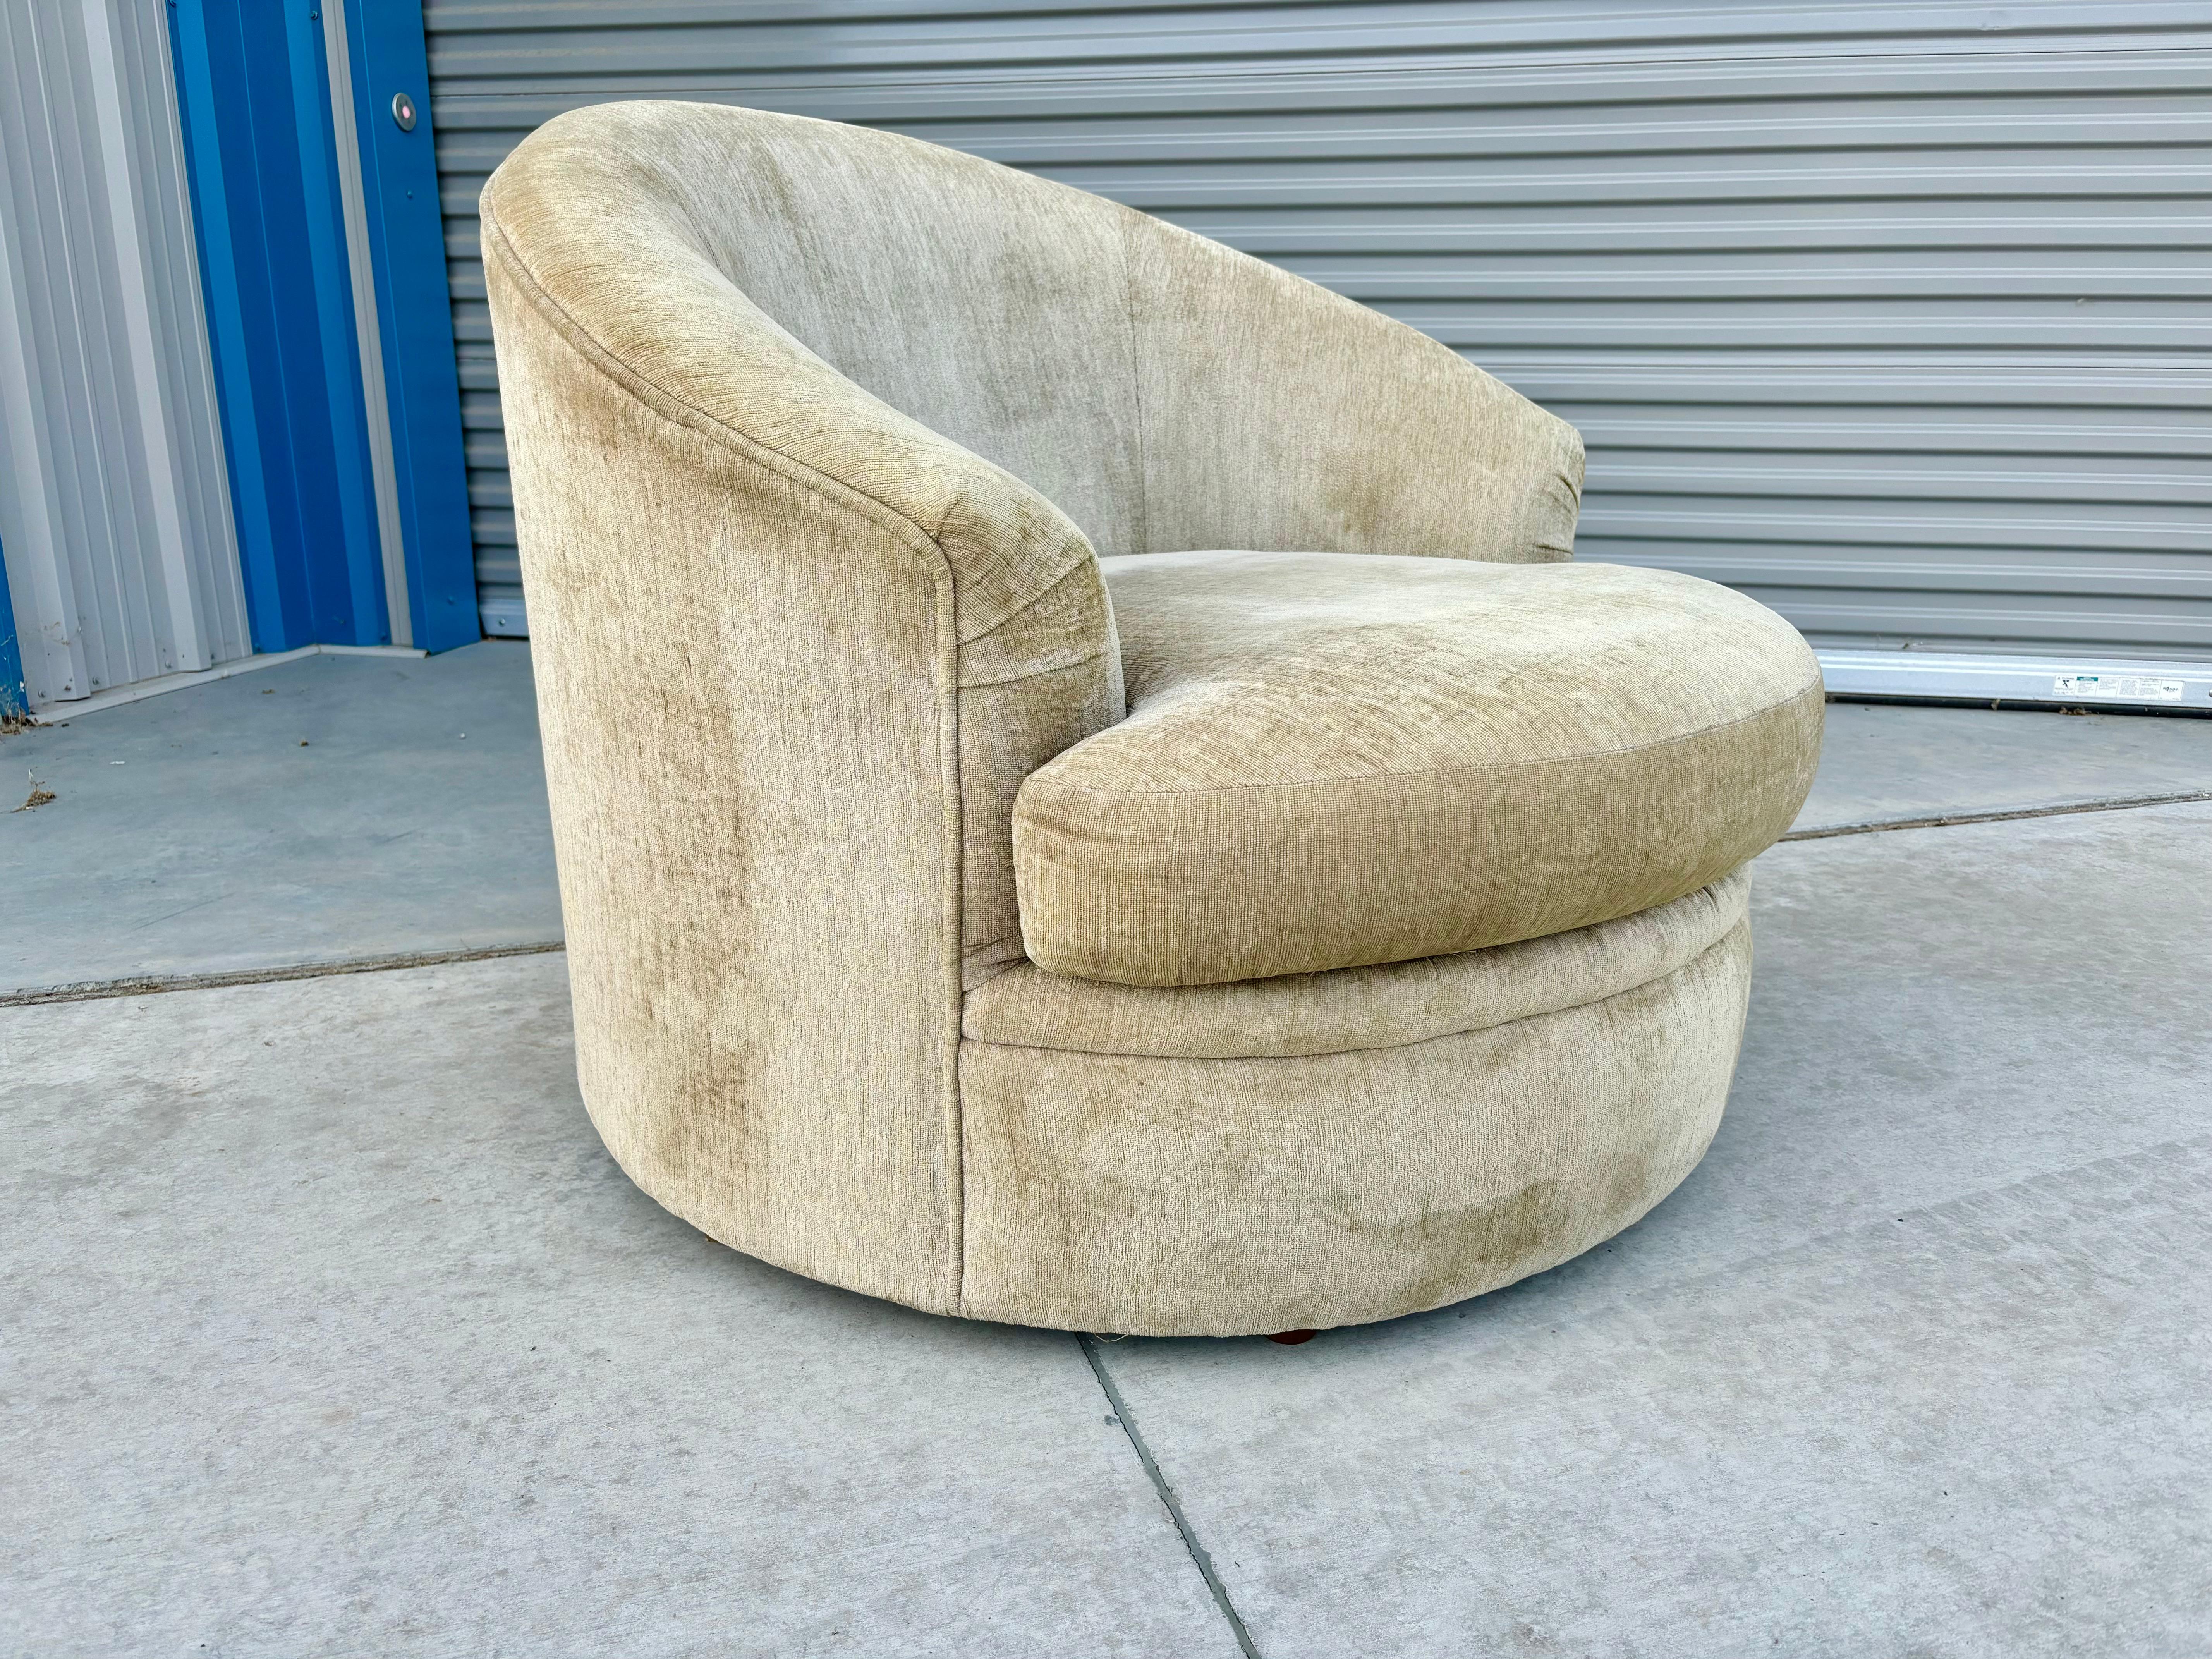 1970s Mid Century Modern Lounge Chairs - Set of 2 For Sale 2